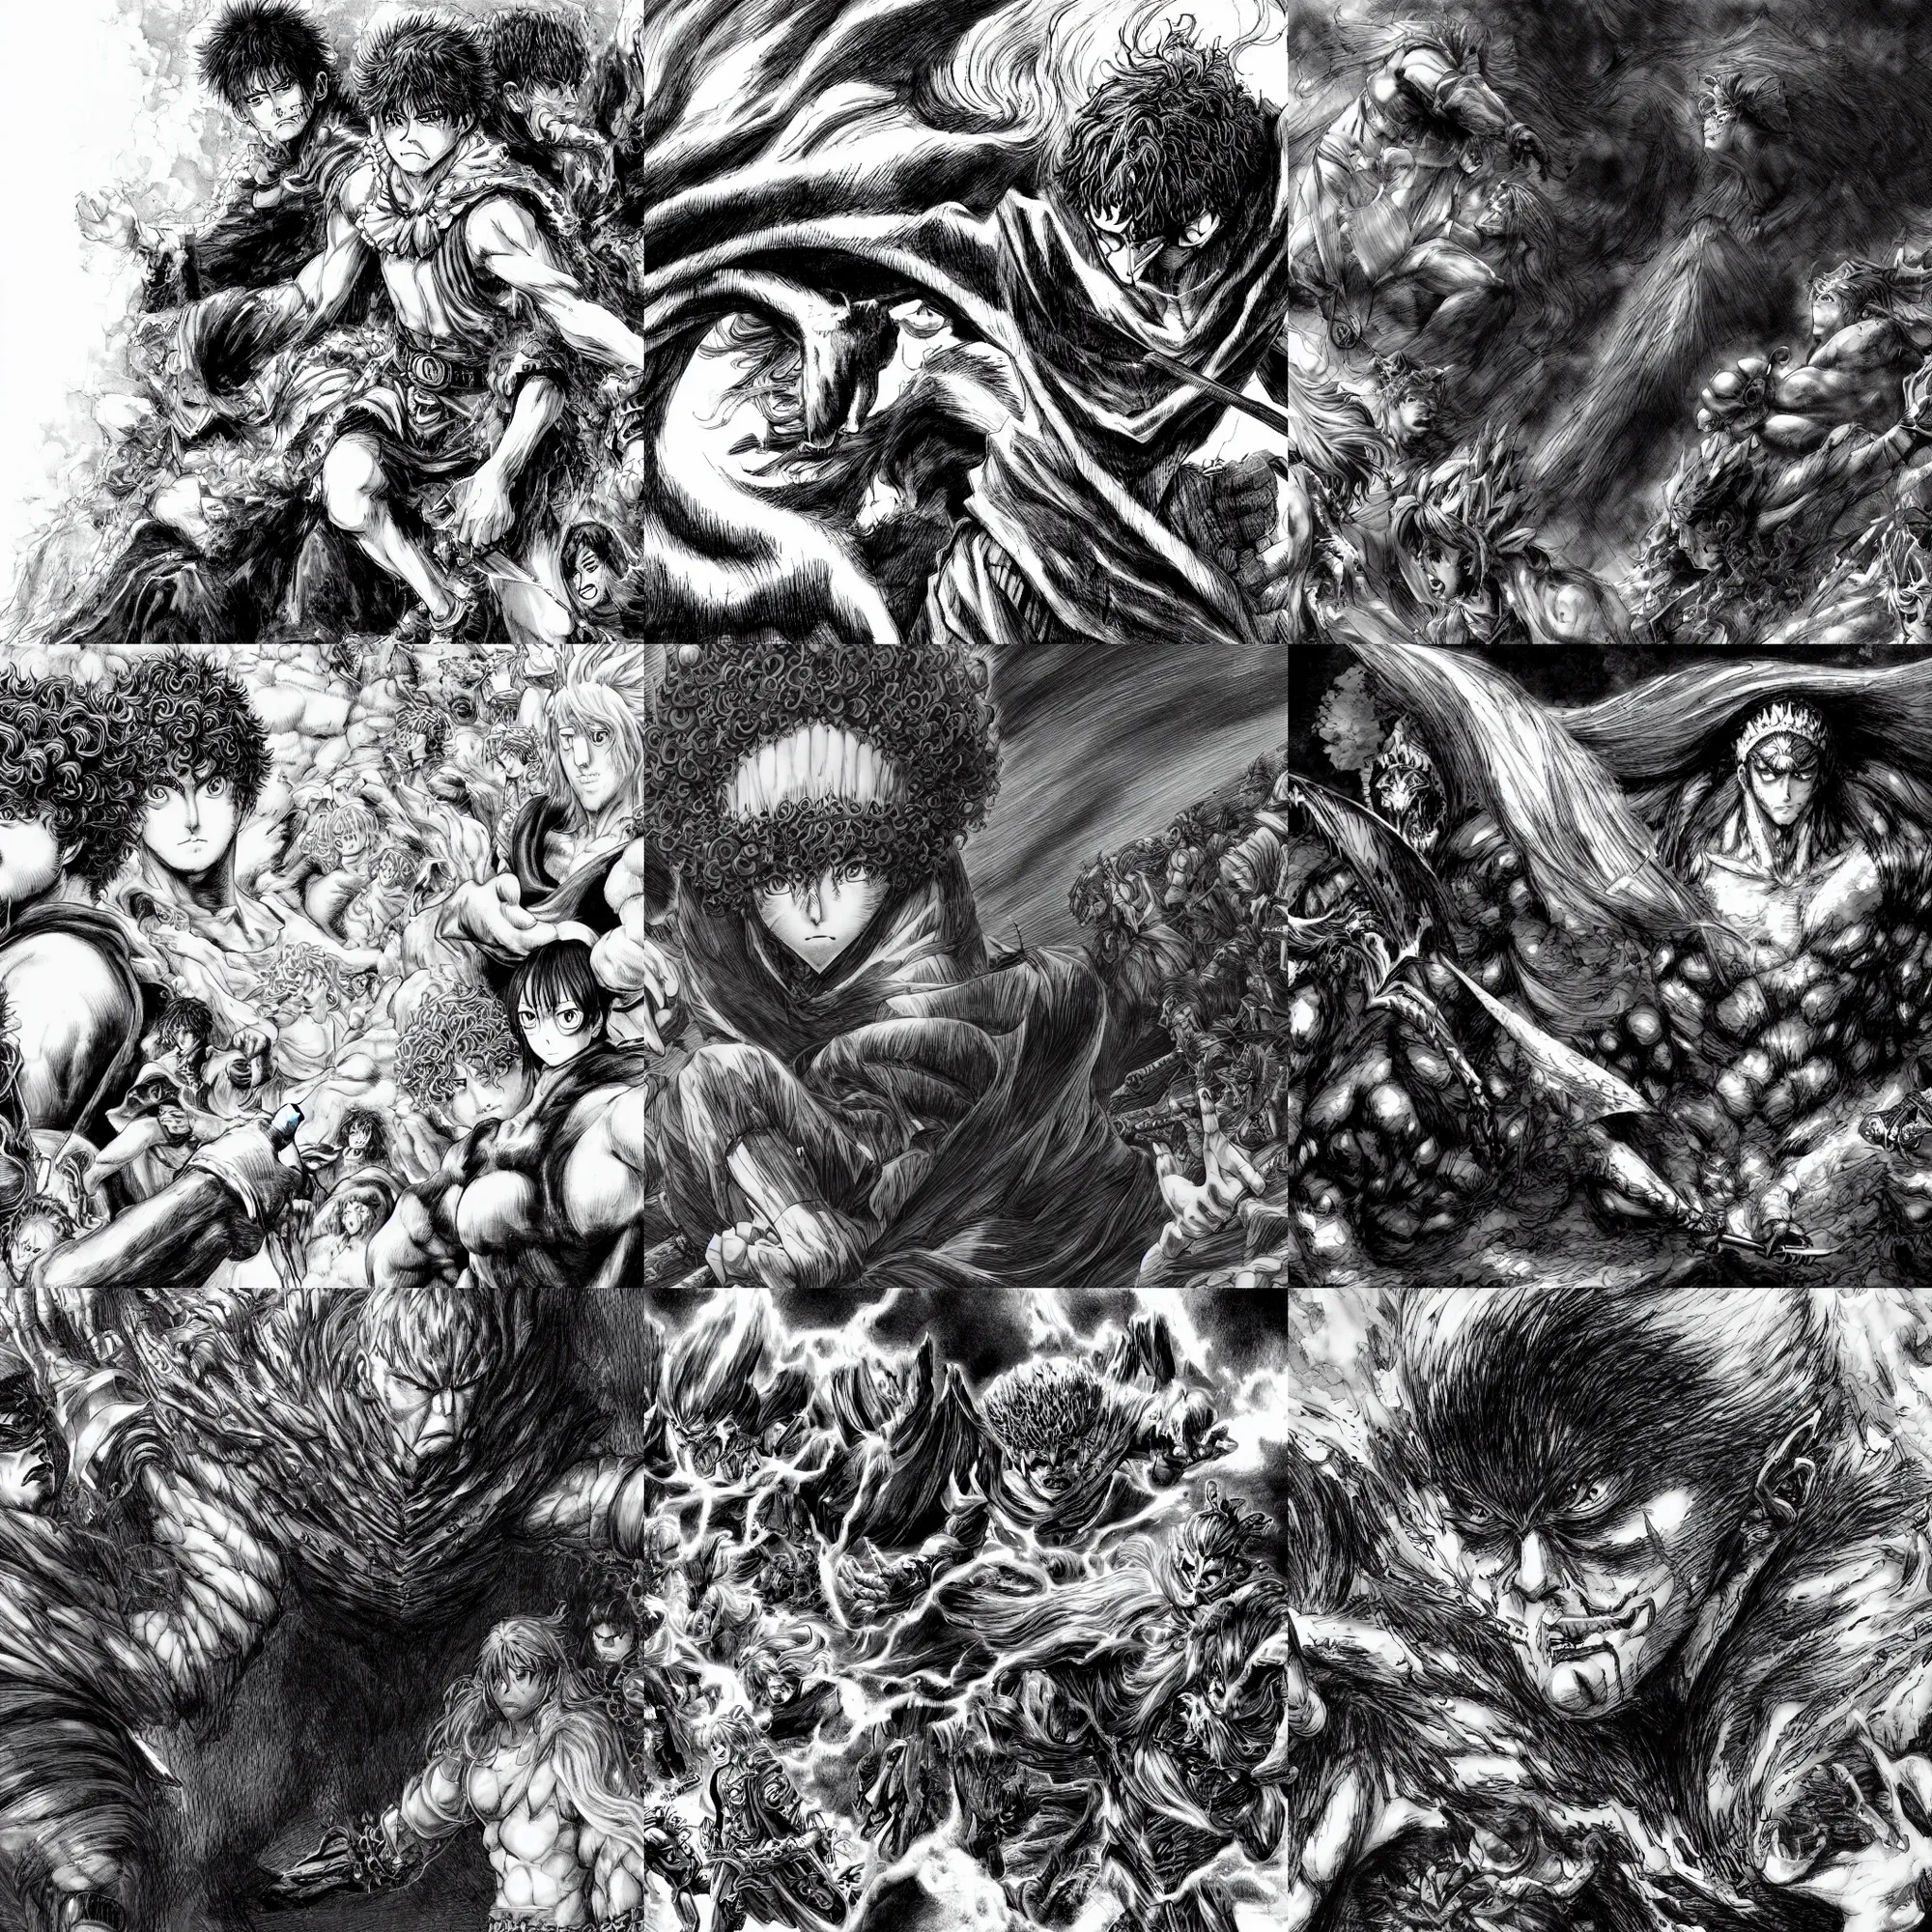 The art of Berserk is beautiful. Some of the best out of all the